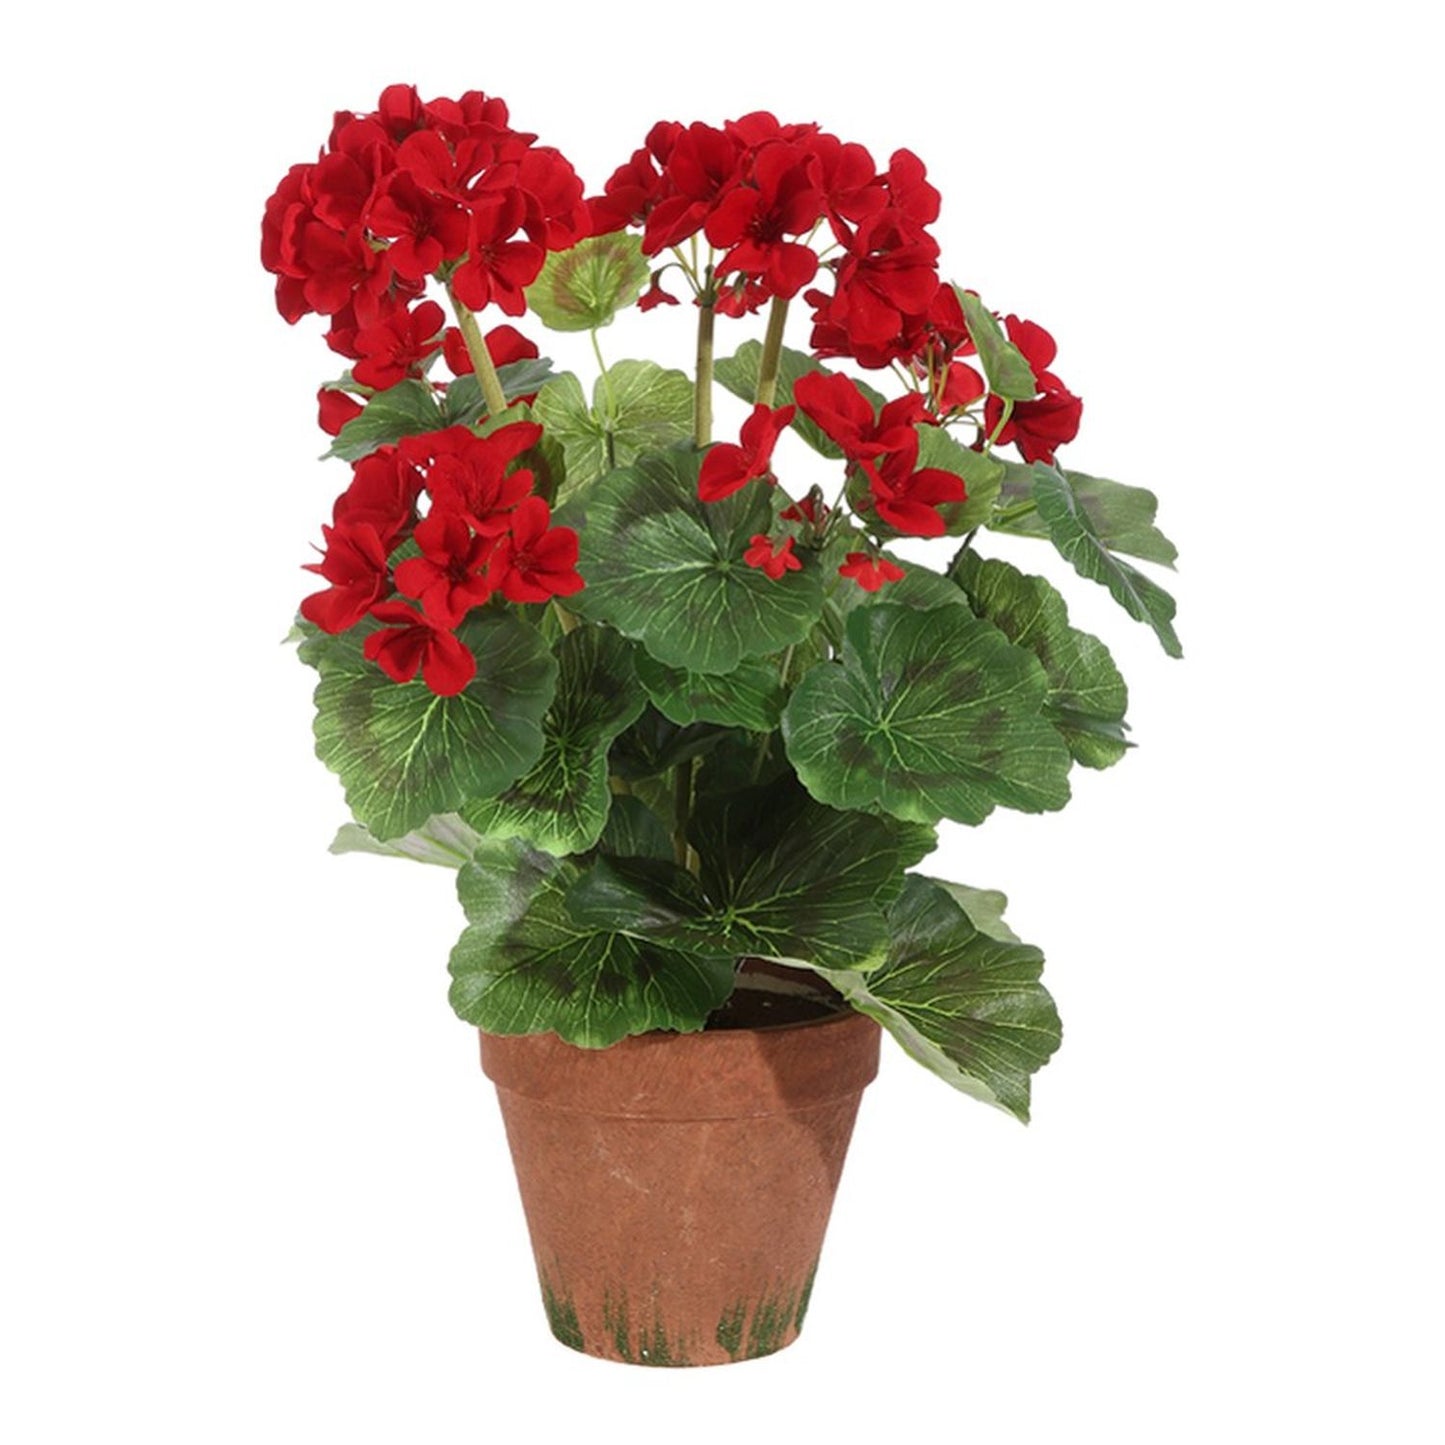 Raz Imports Home Sweet Home 17" Red Potted Geranium